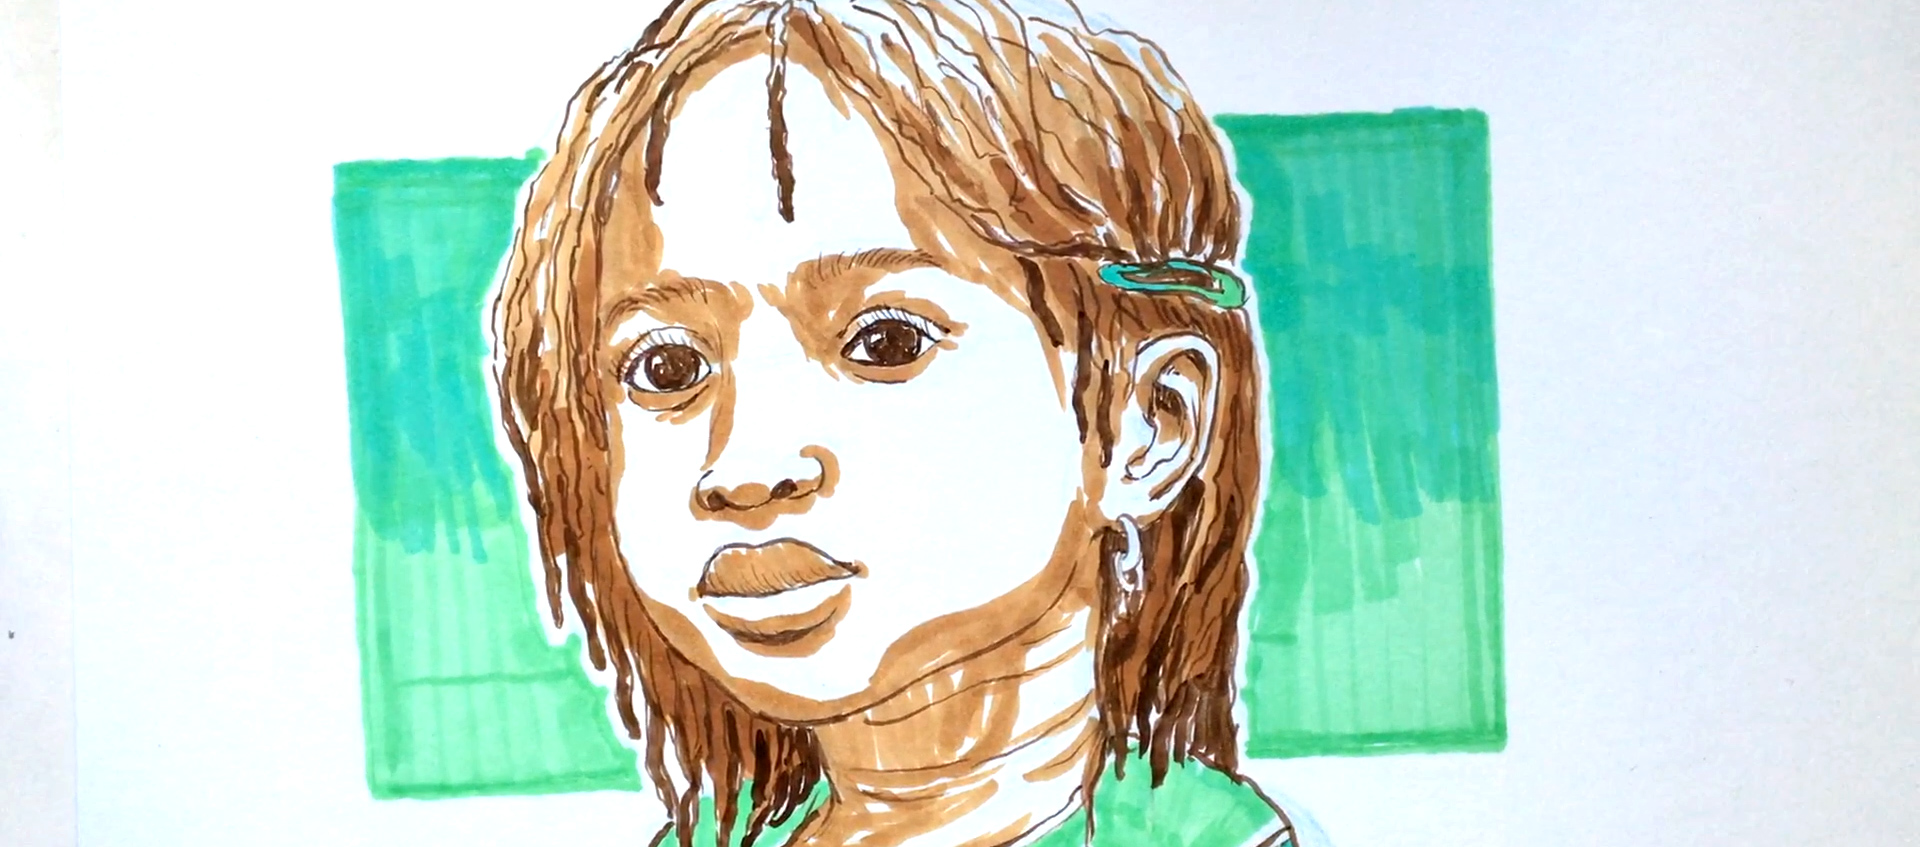 Portrait of a young girl of color against a green color block by illustrator & children's book author Robert Liu-Trujillo